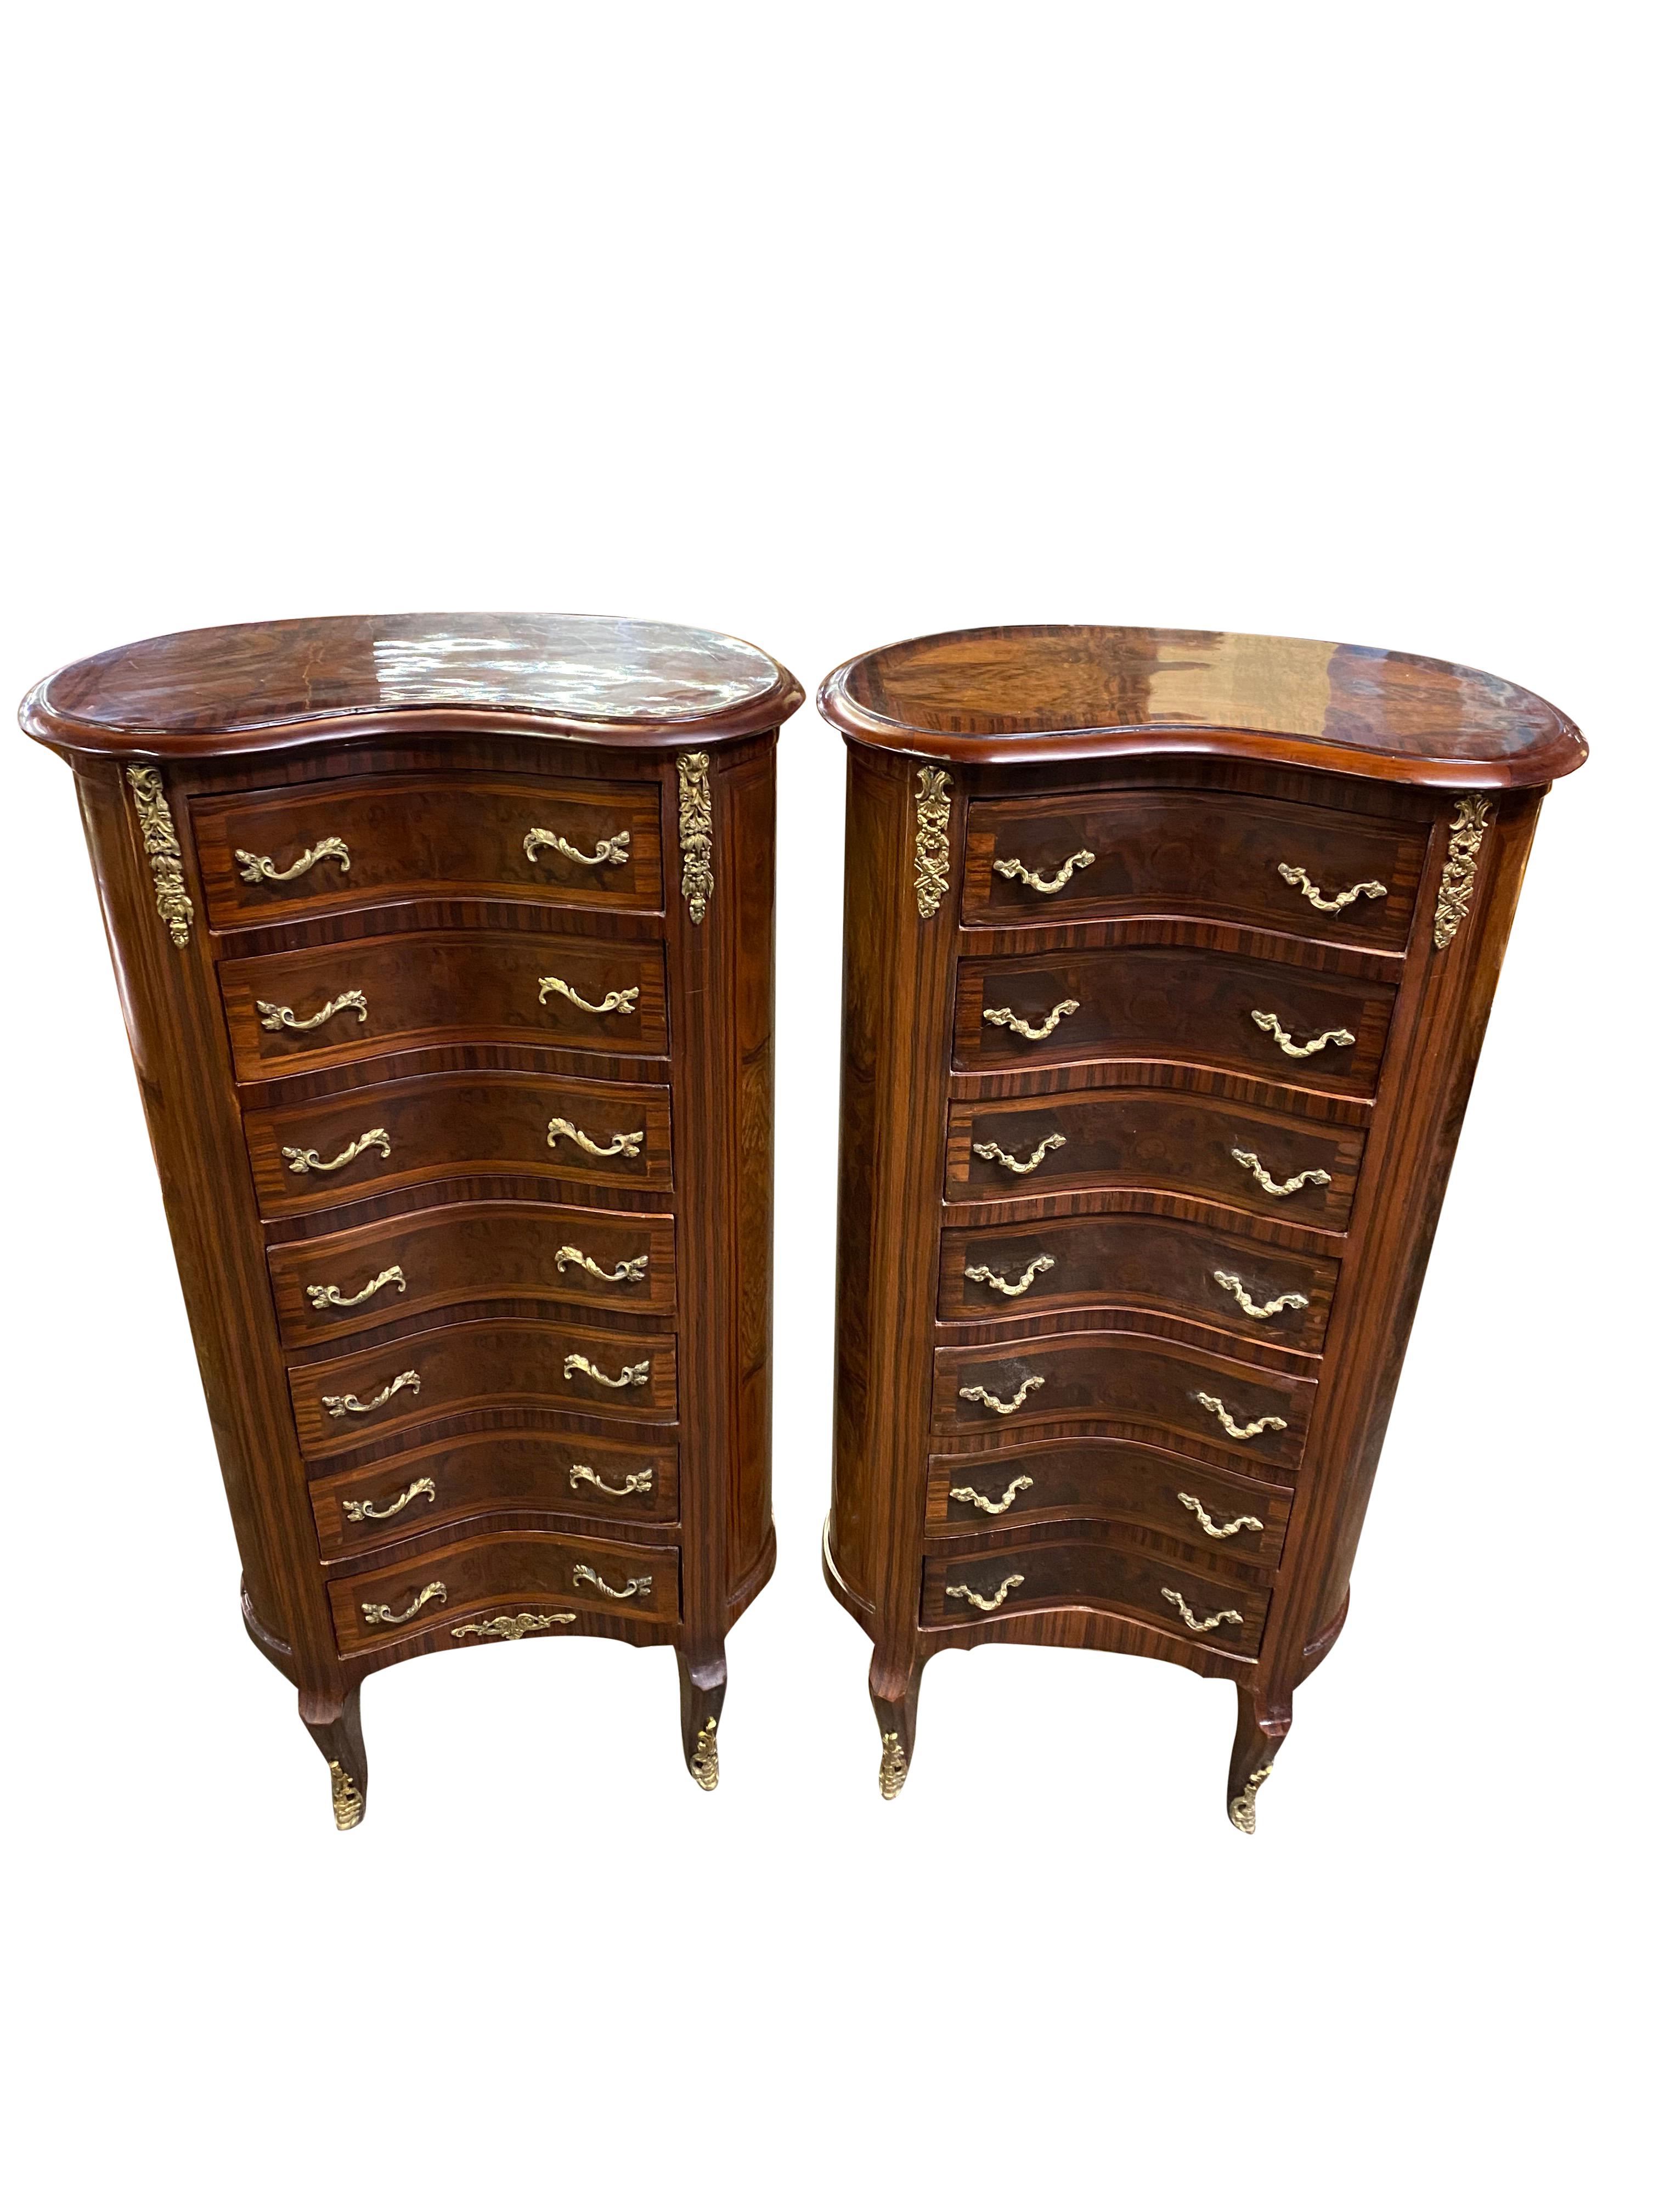 European Pair of 20th Century English Regency Style Side Tables/Cabinets For Sale